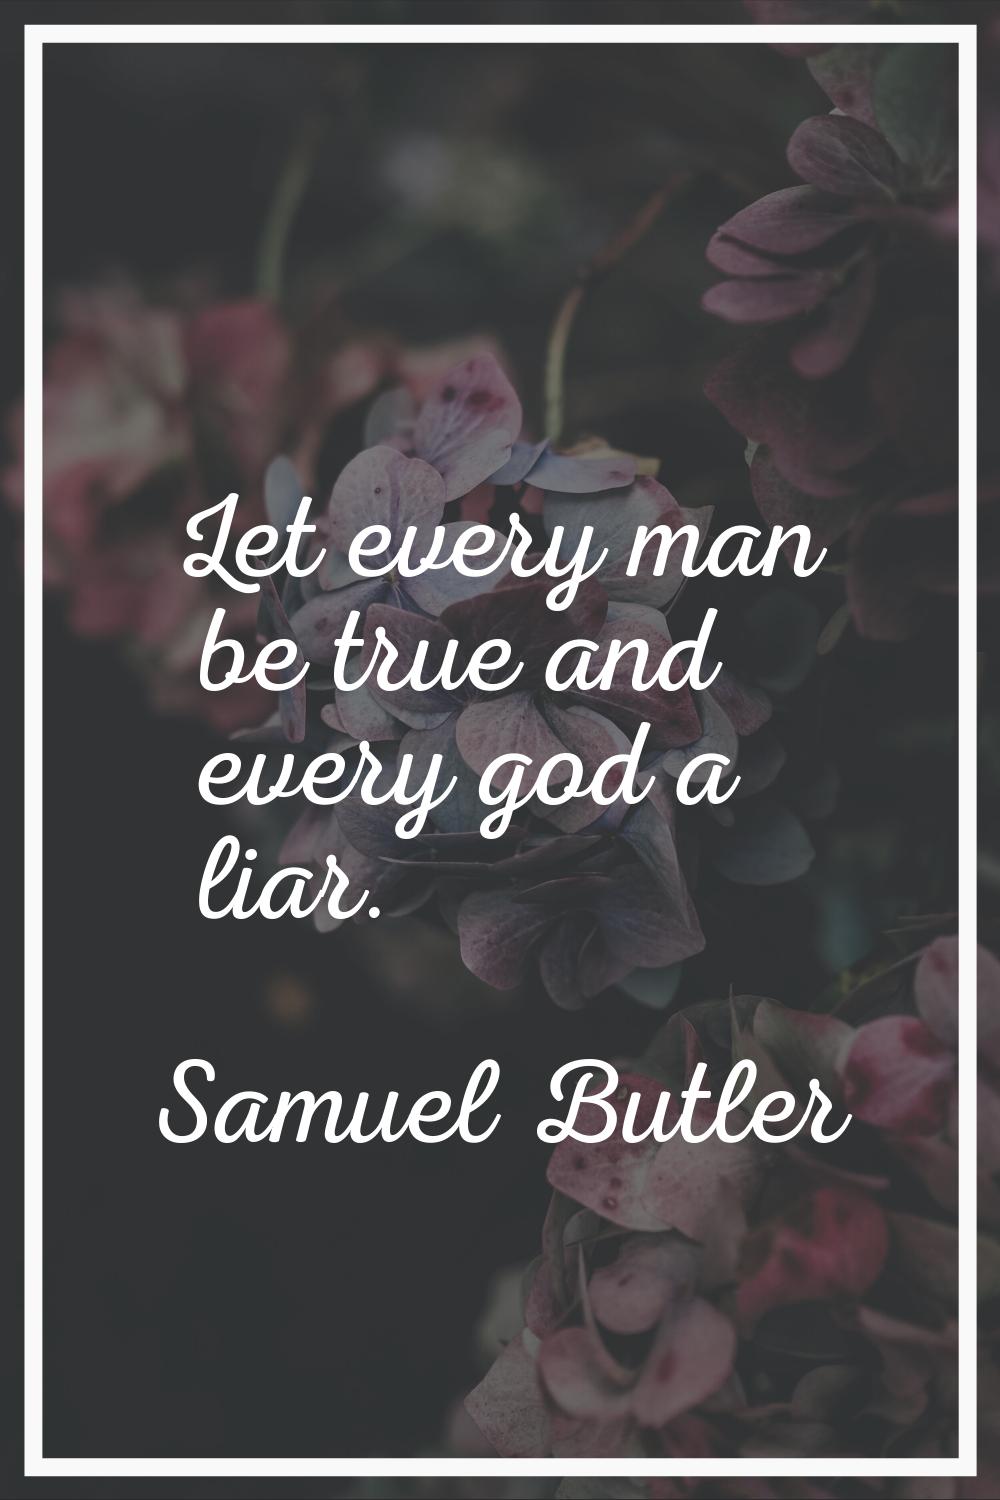 Let every man be true and every god a liar.